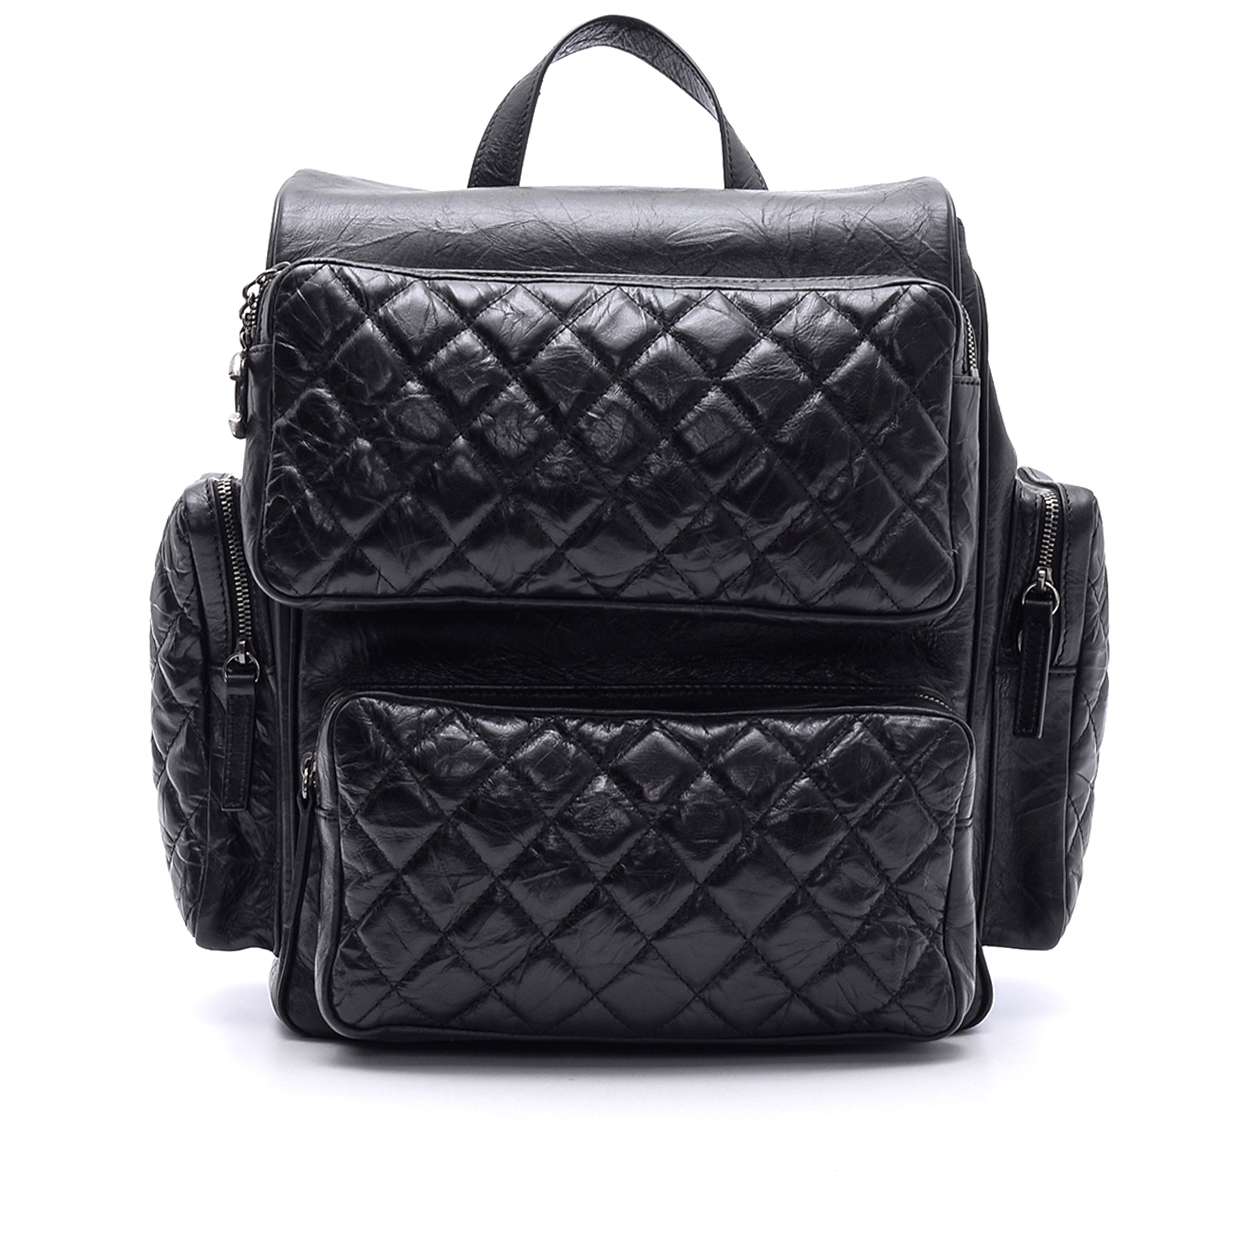 Chanel -  Black Quilted Calfskin Leather Backpack